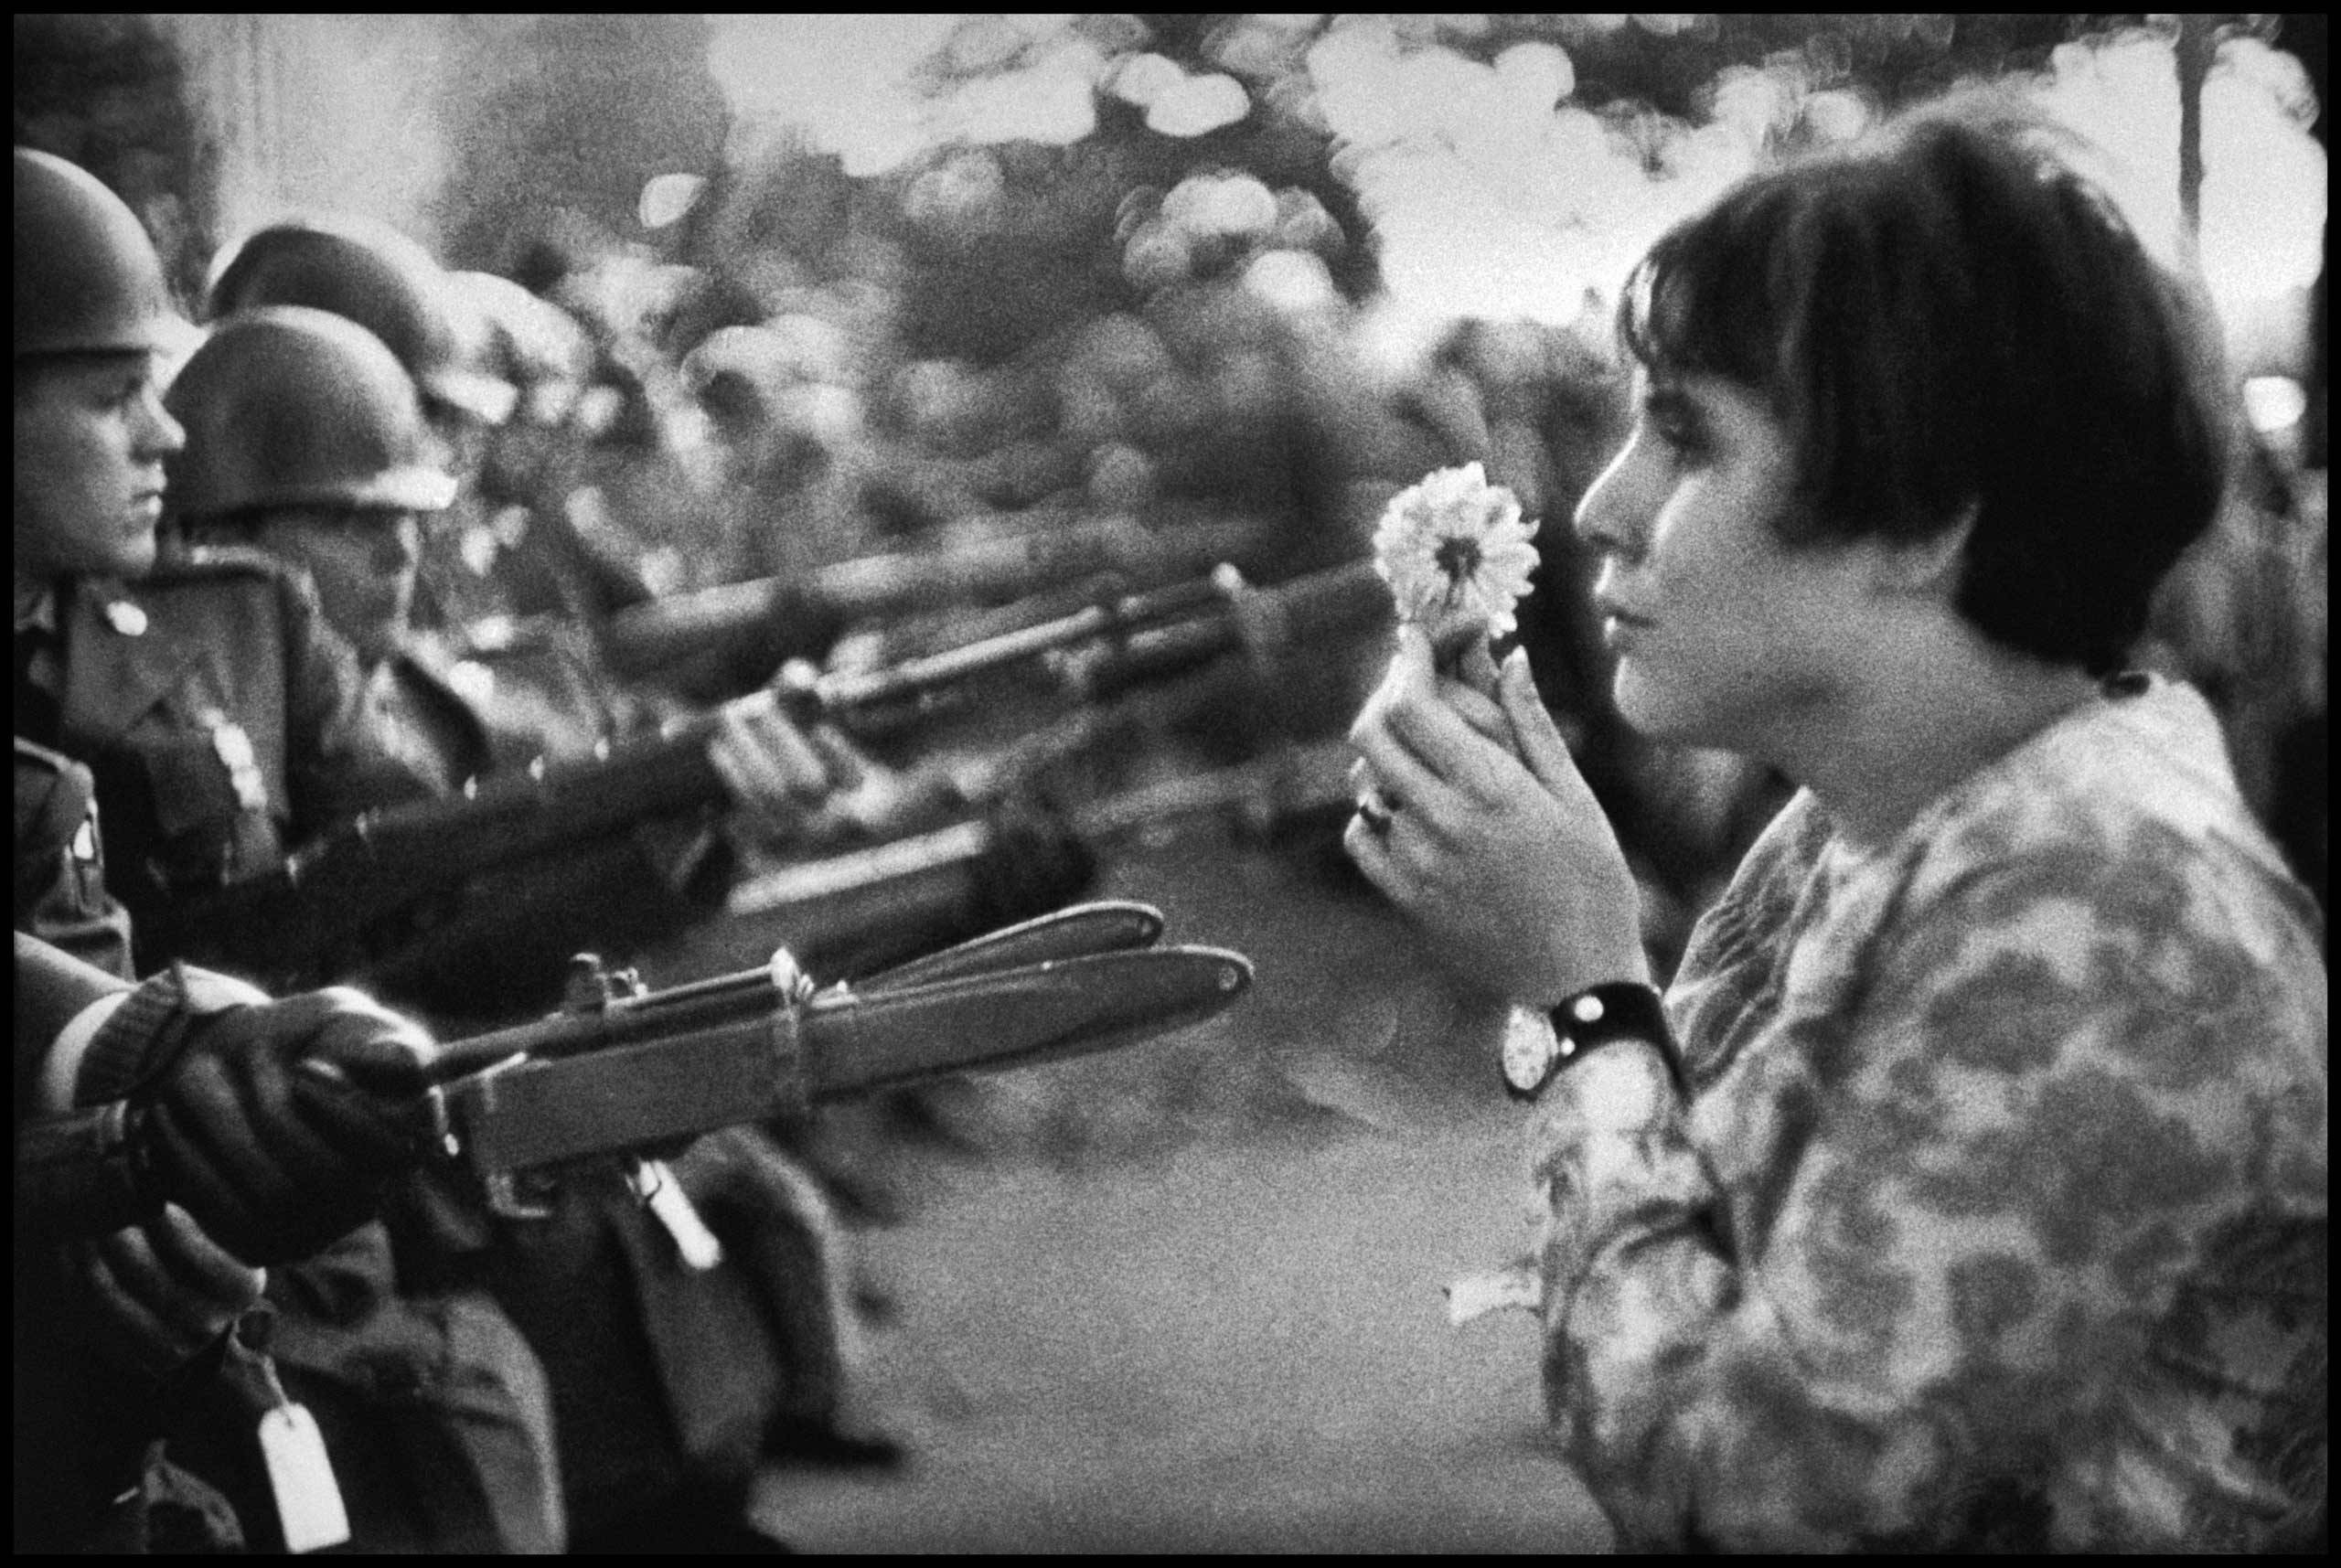 Jan Rose Kasmir offers a flower to a solider at Anti War protest in Washington DC